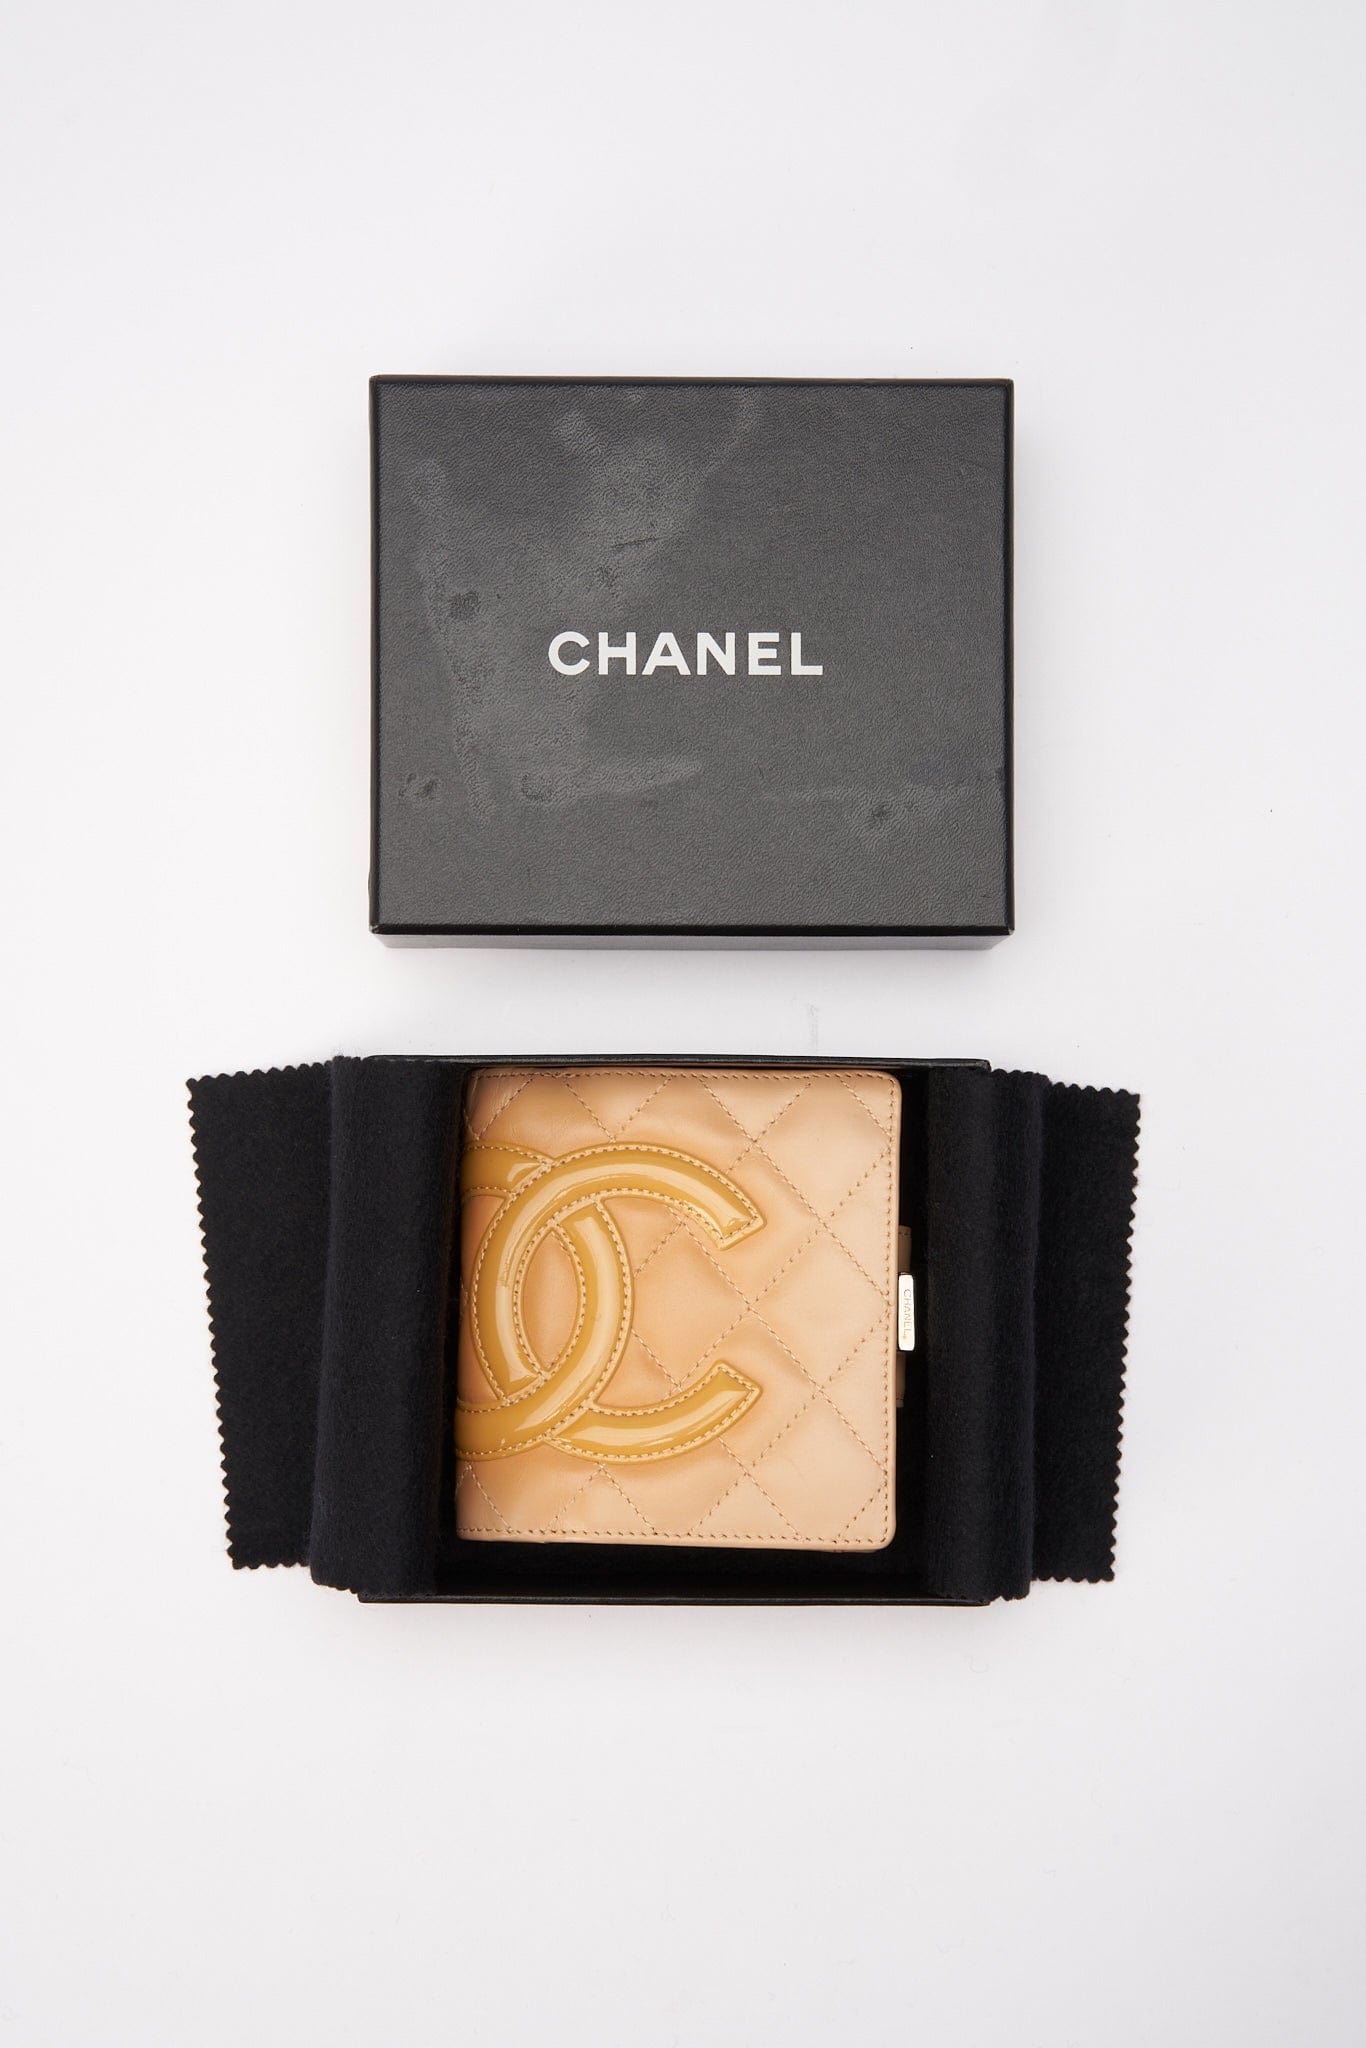 Chanel Peach Quilted Lambskin Vintage Wallet